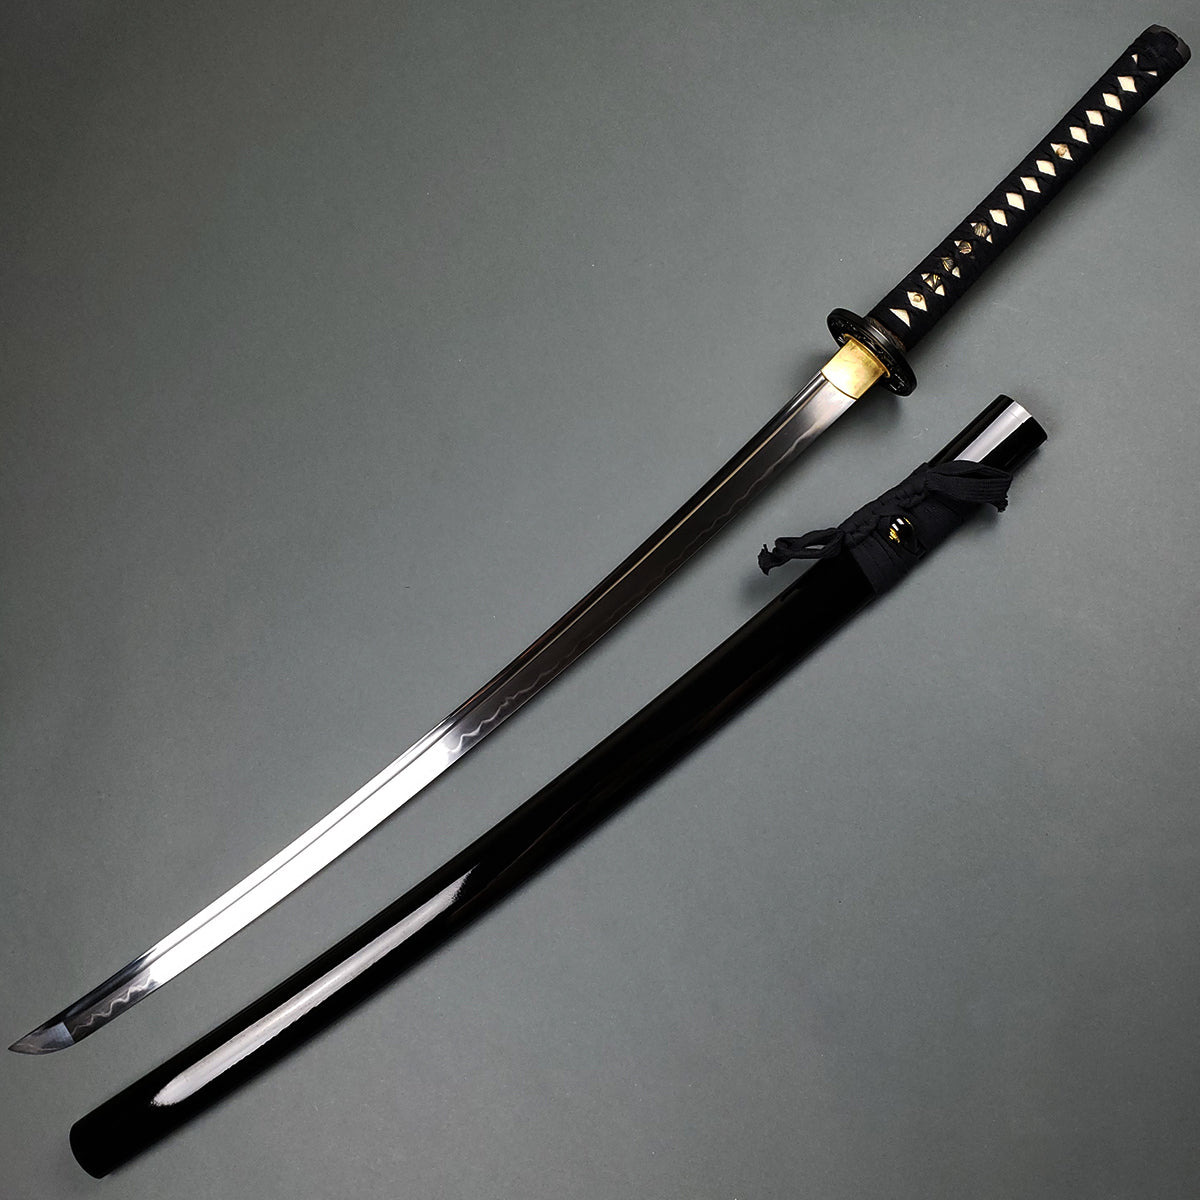 What is the sharpest blade or sword (weapon) in the world